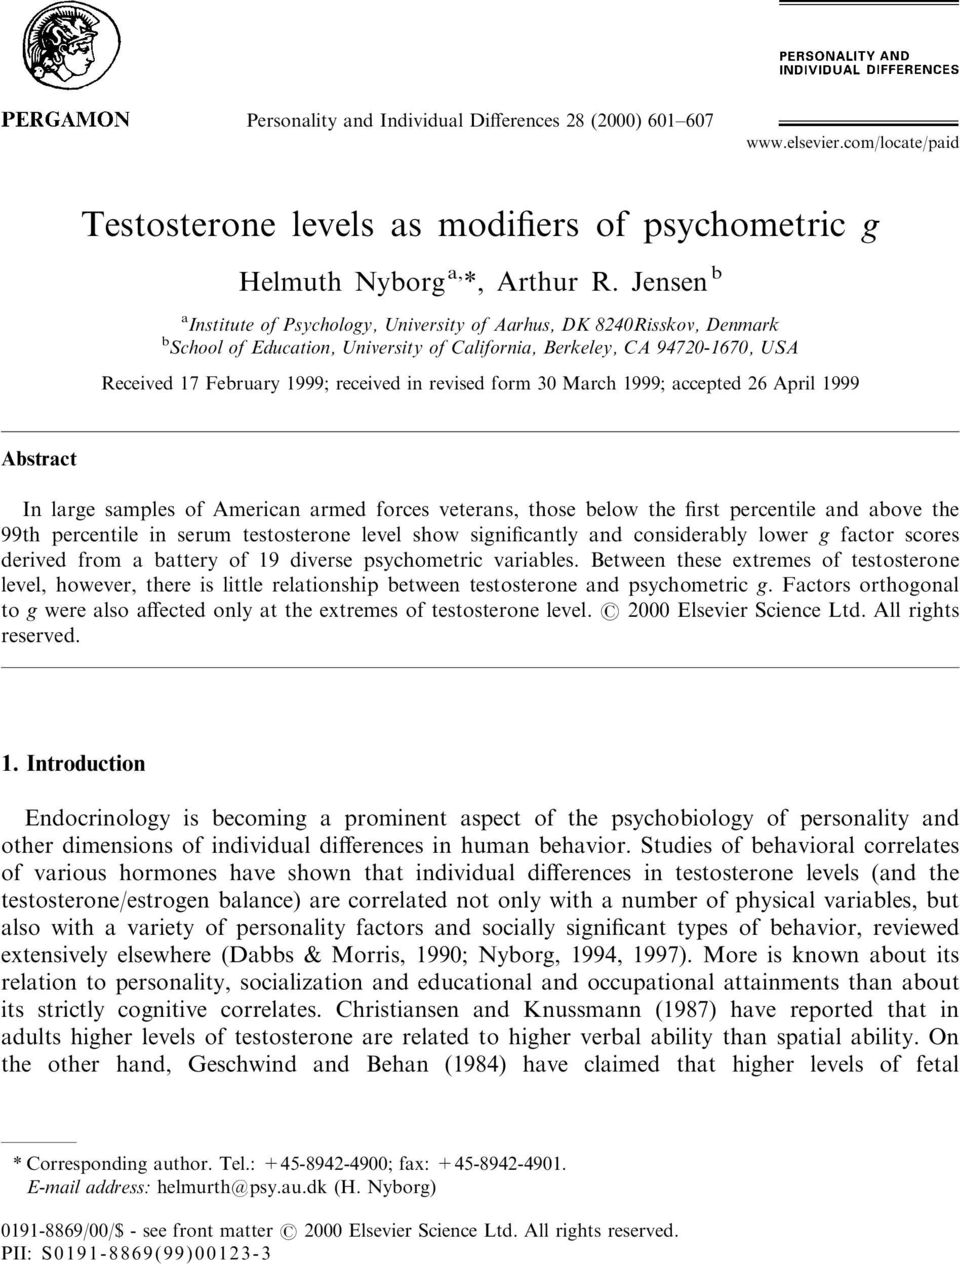 revised form 30 March 1999; accepted 26 April 1999 Abstract In large samples of American armed forces veterans, those below the rst percentile and above the 99th percentile in serum testosterone